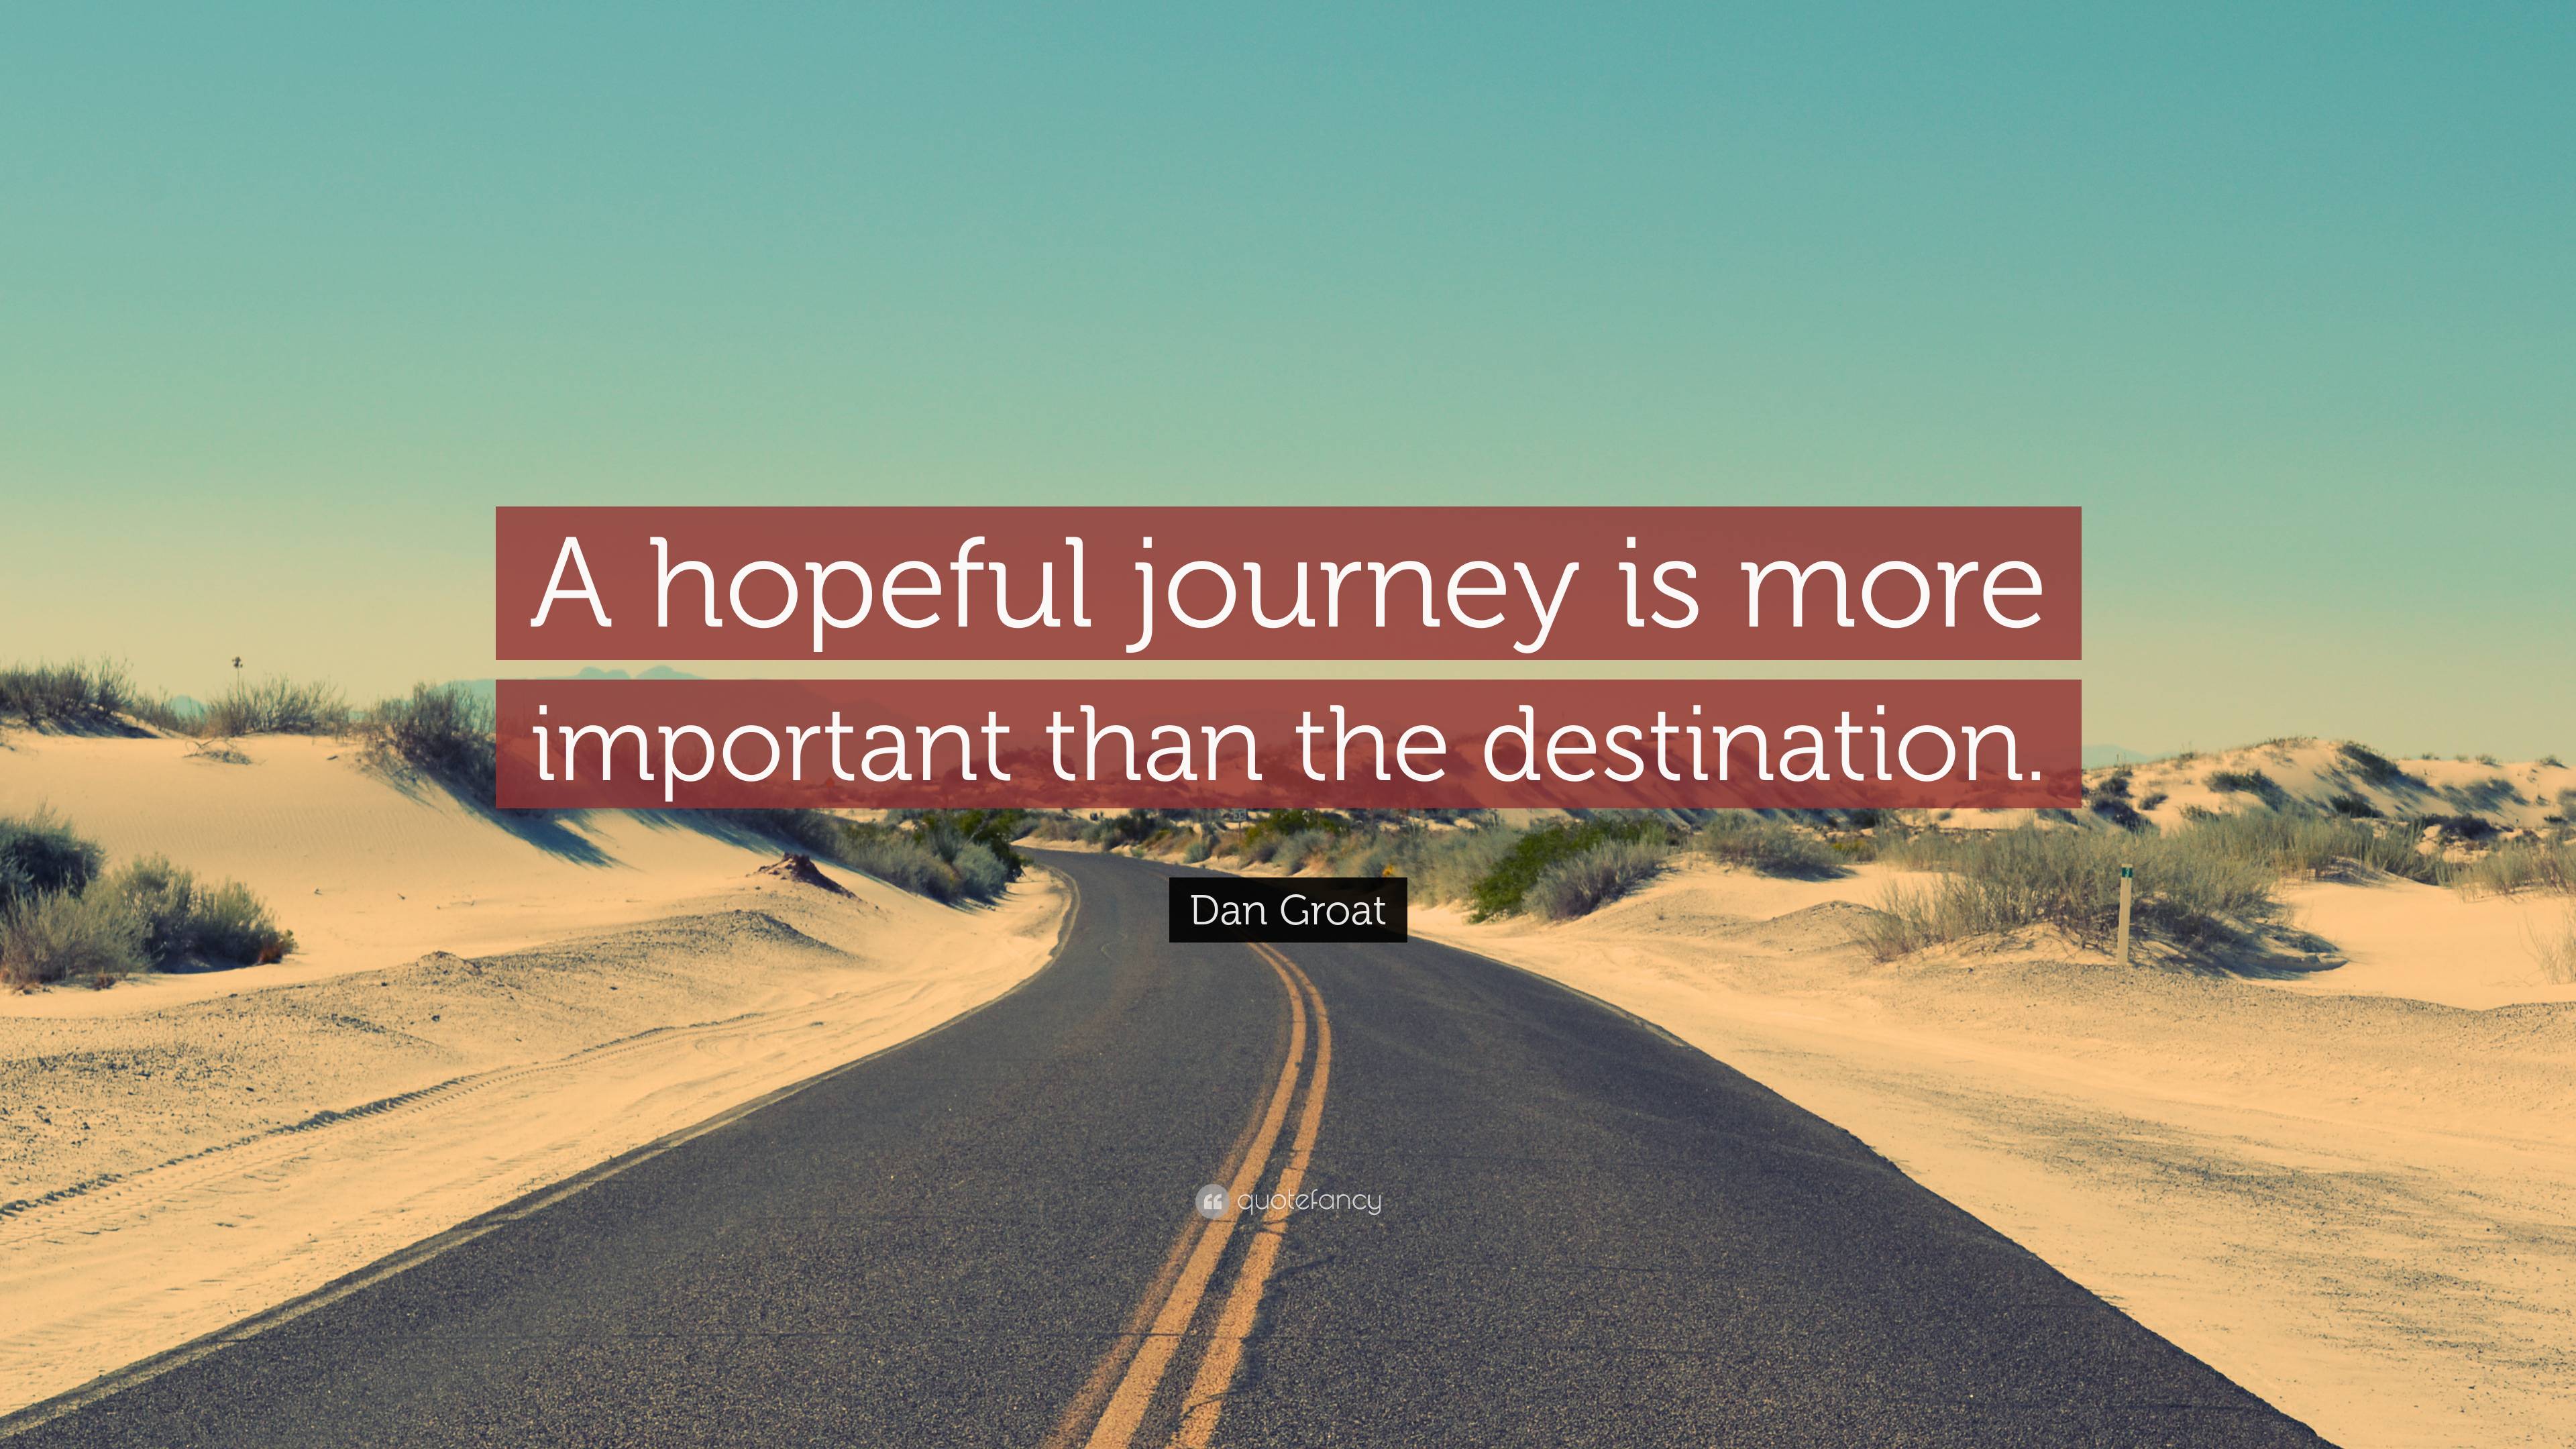 the journey is more important than the destination